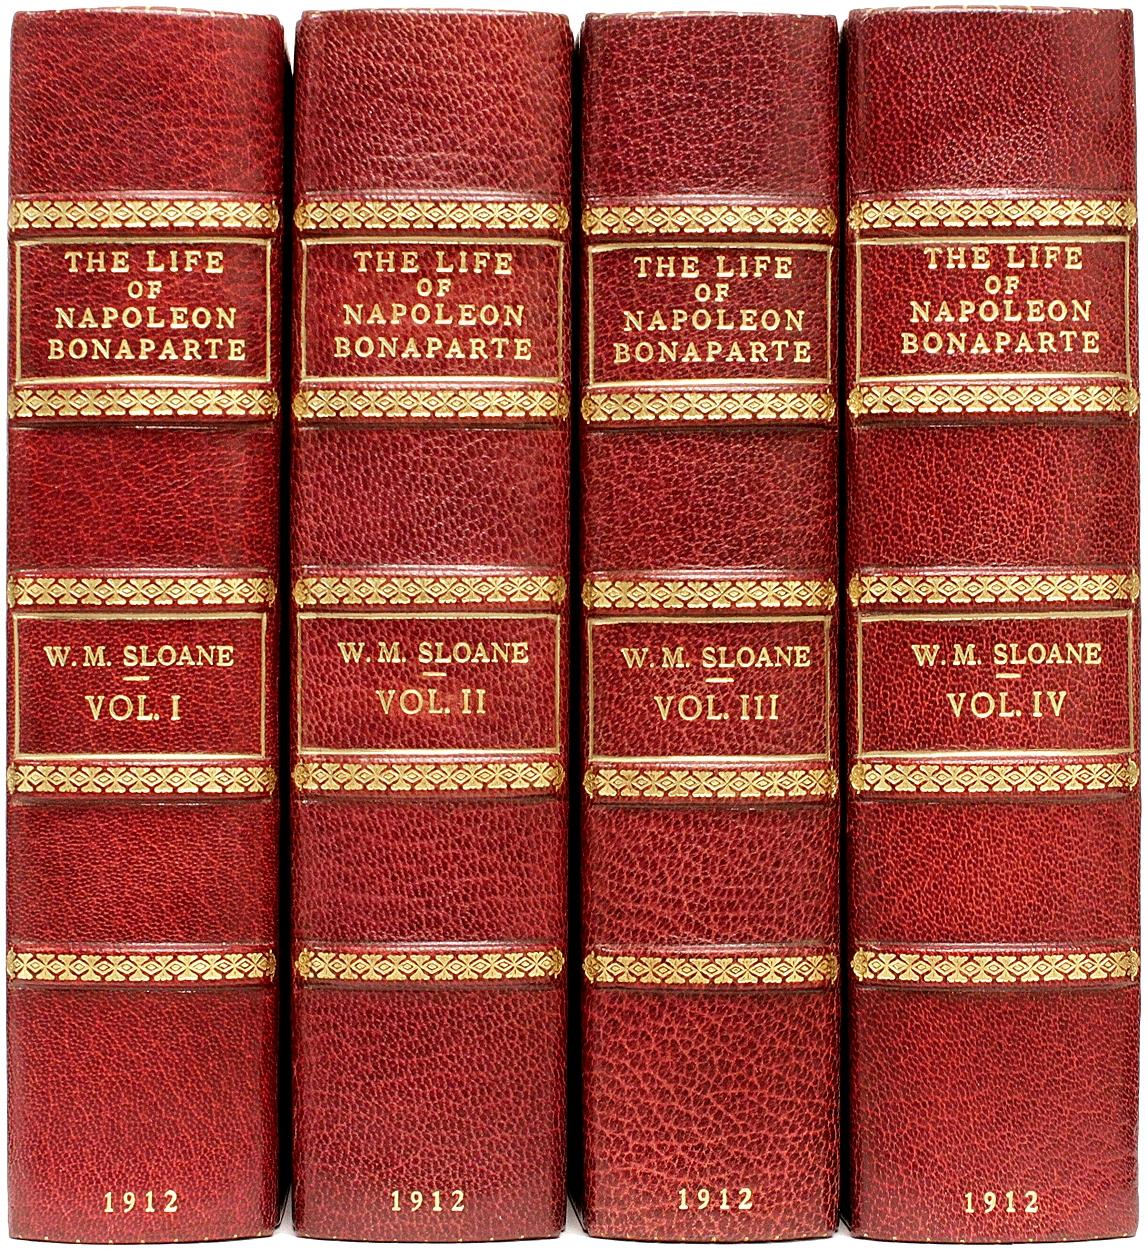 AUTHOR: SLOANE, William Milligan. 

TITLE: The Life Of Napoleon Bonaparte.

PUBLISHER: London: The Times Book Club, 1912.

DESCRIPTION: NEW REVISED AND ENLARGED EDITION. 4 vols., 8